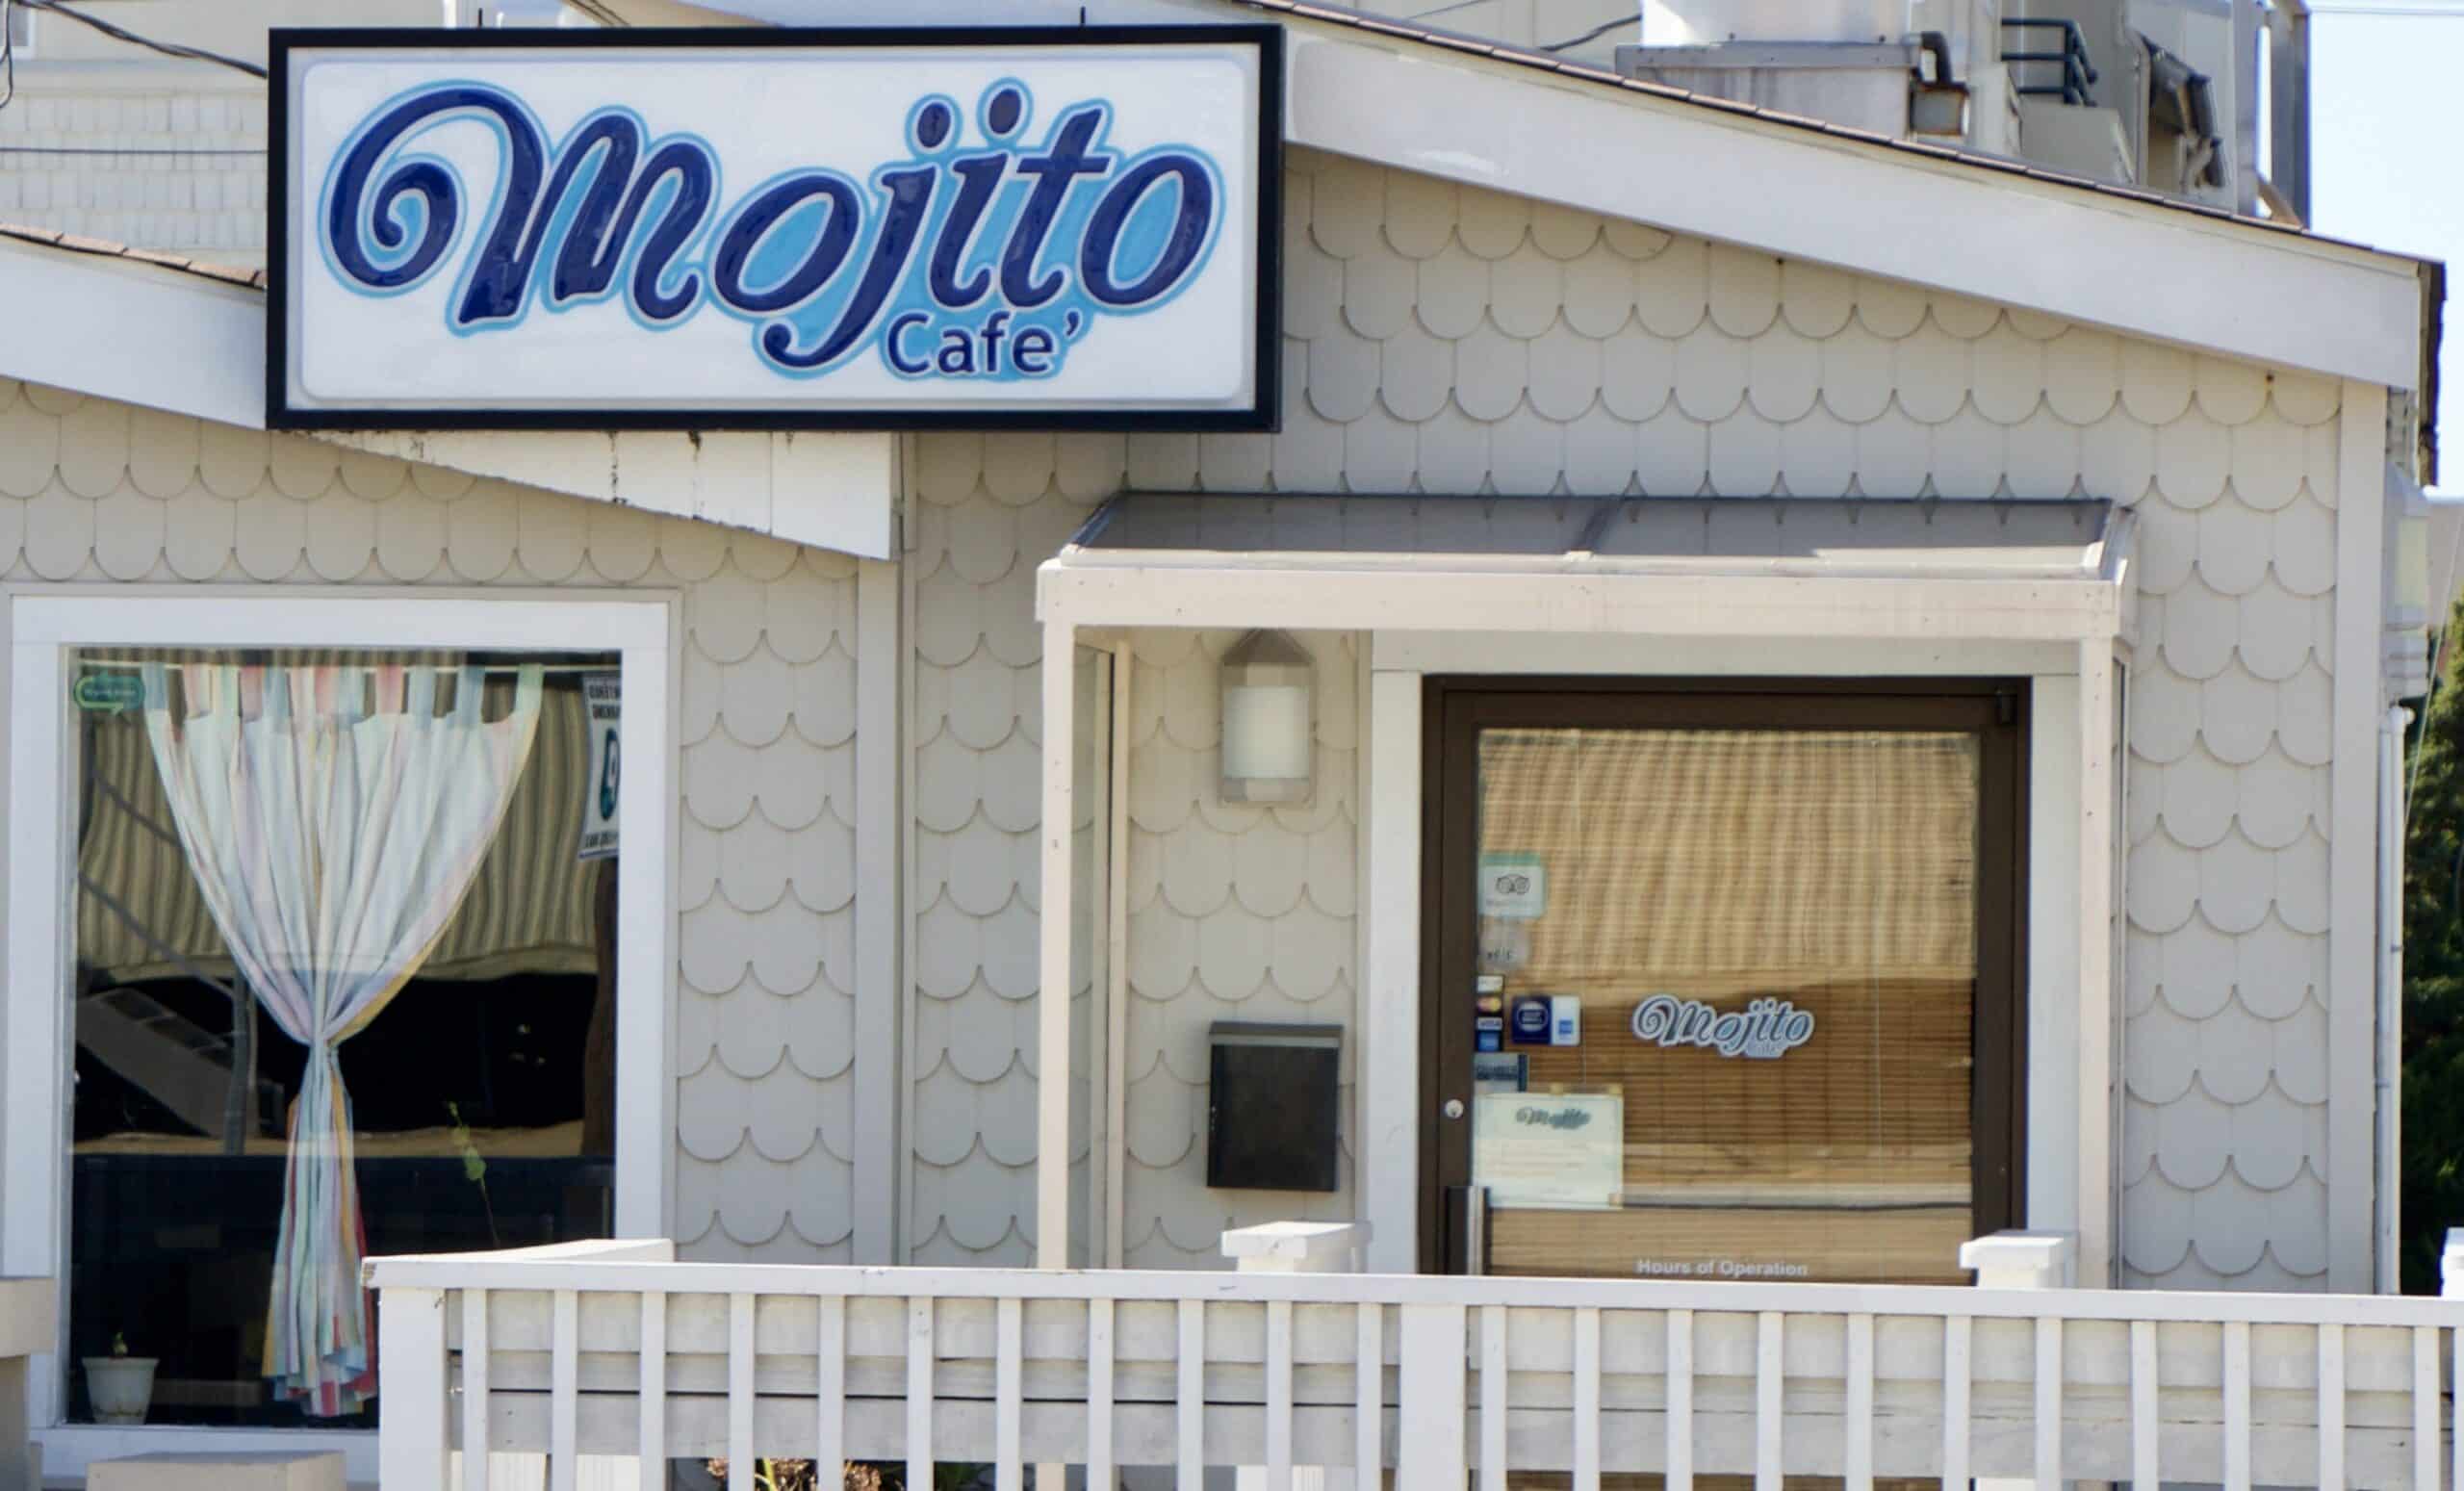 Thumbnail picture of the Mojito Cafe near the VA beaches.